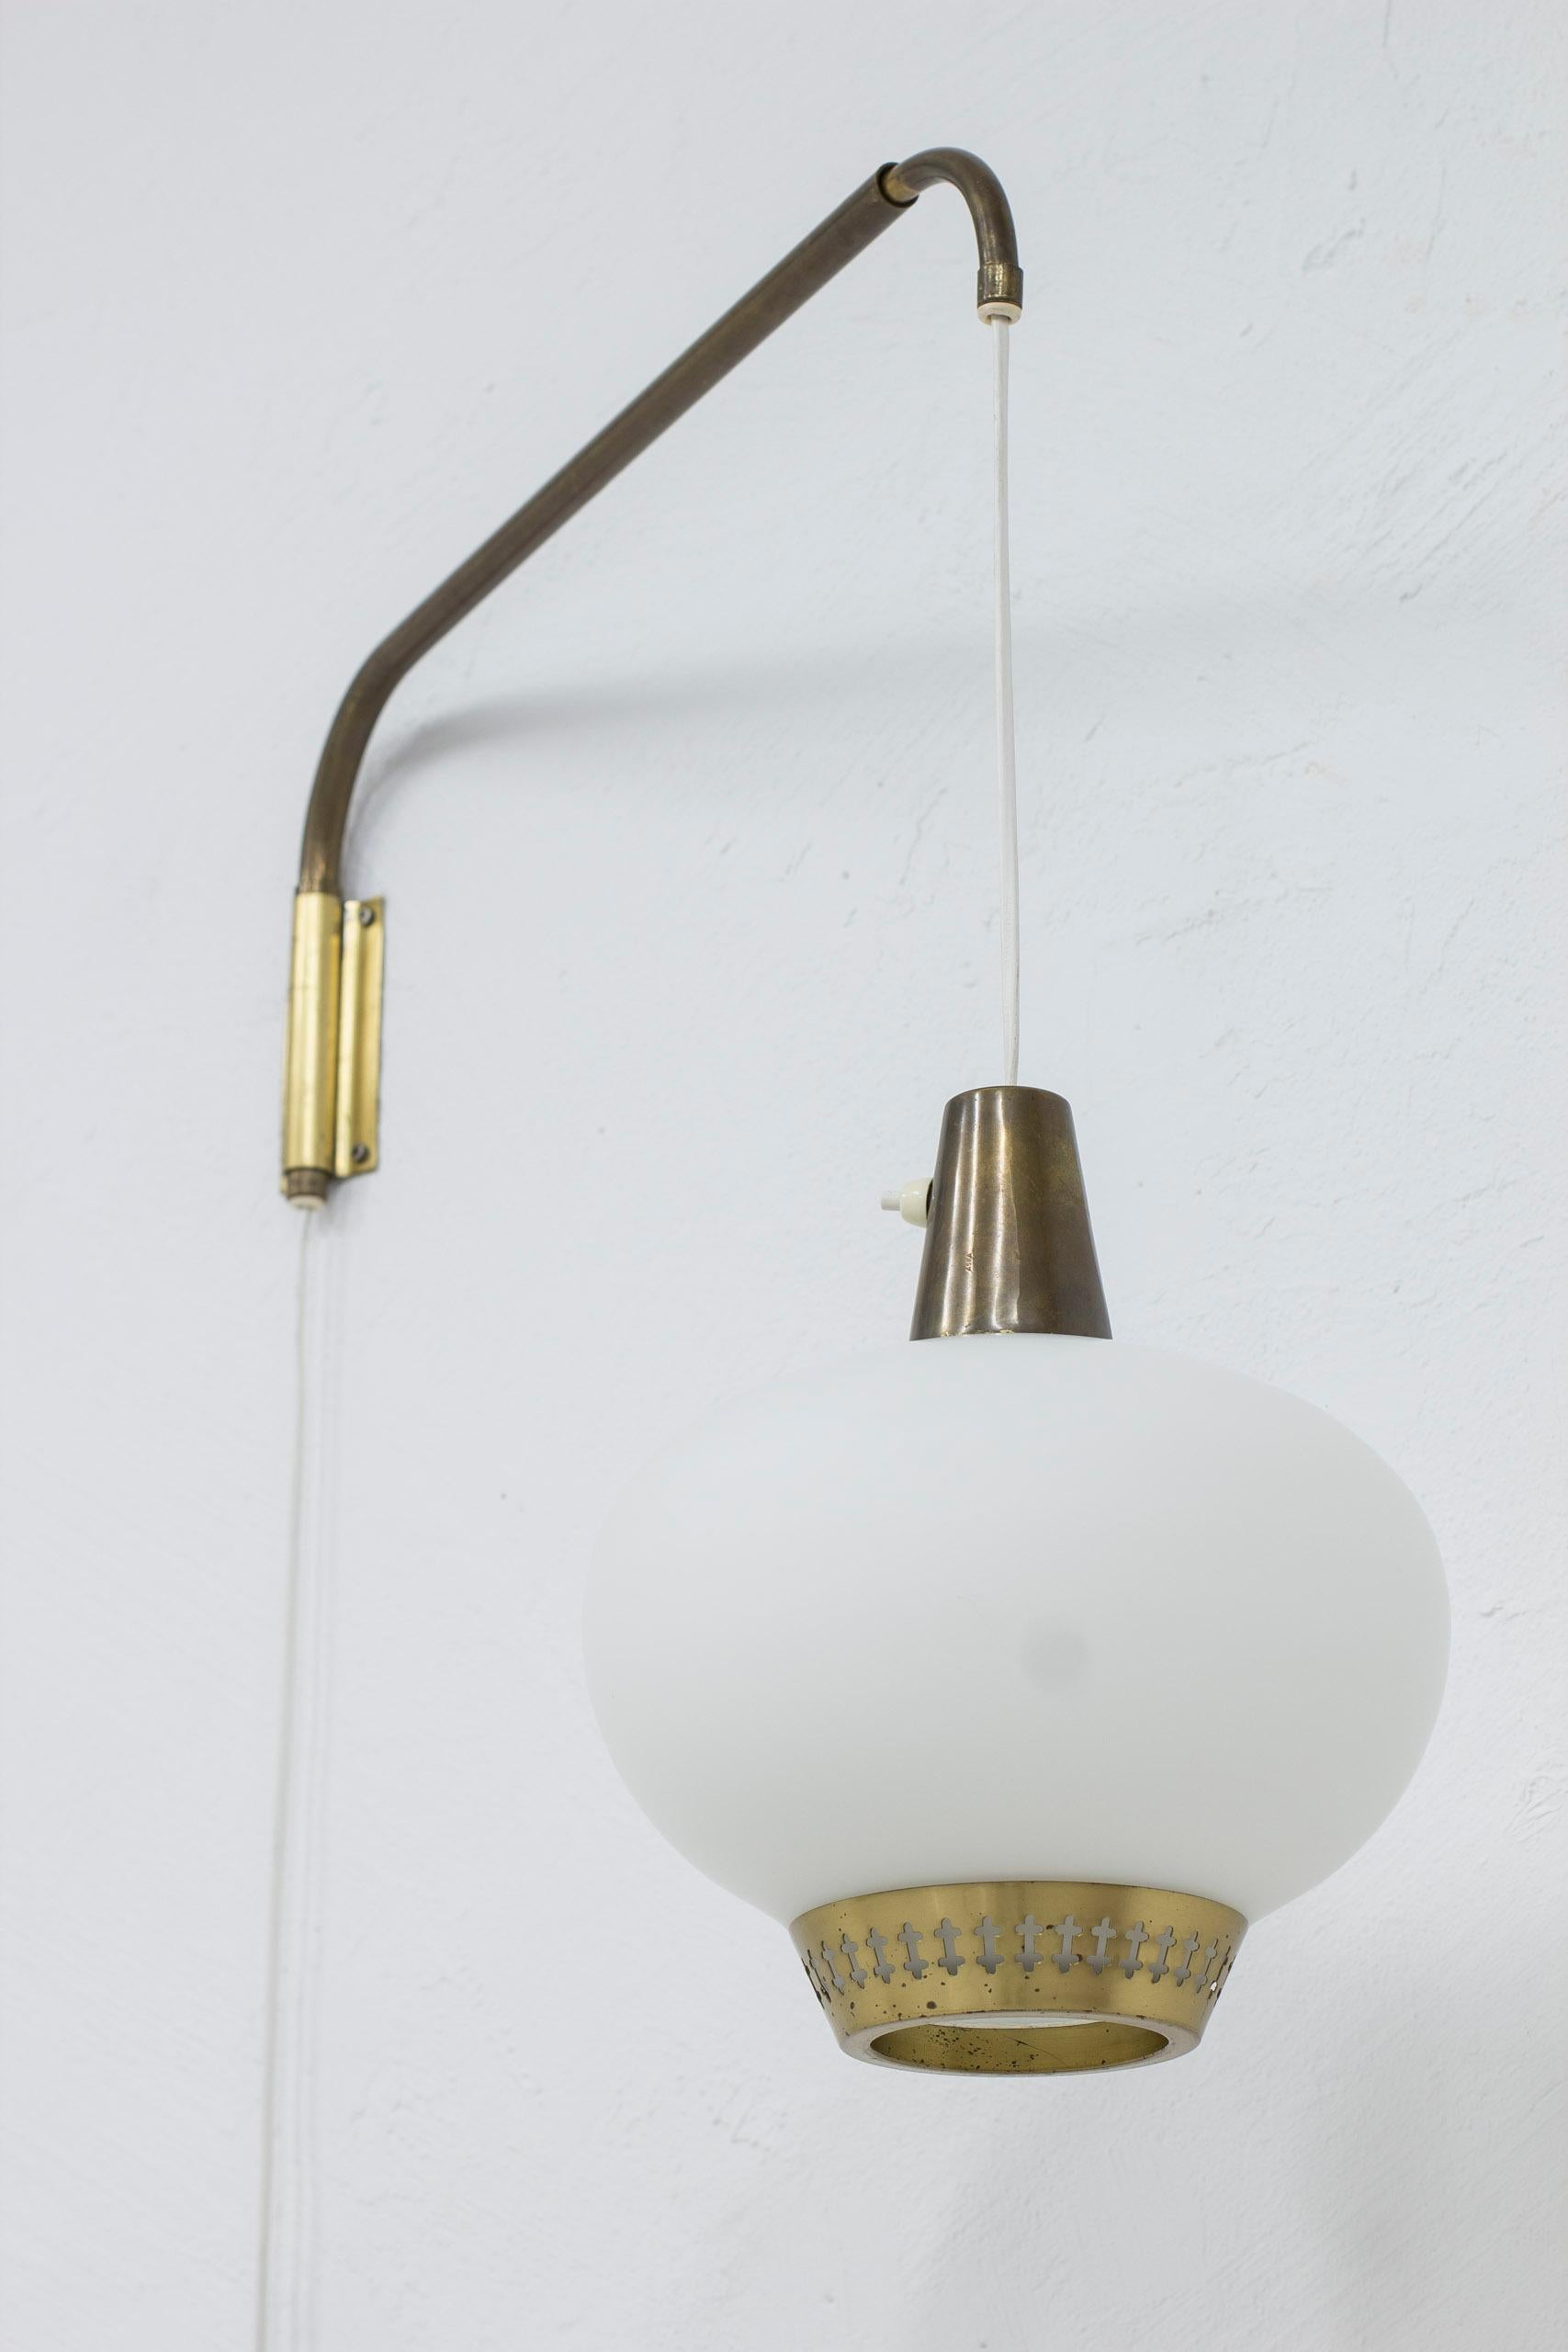 Rare wall lamp attributed to Hans Bergström. Produced by ASEA belysning during the 1950s. Brass lamp arm that easily adjusts and can be elongated. the chord can also be raised or lowered after preference. Lamp shade in opal glass with brass rim and